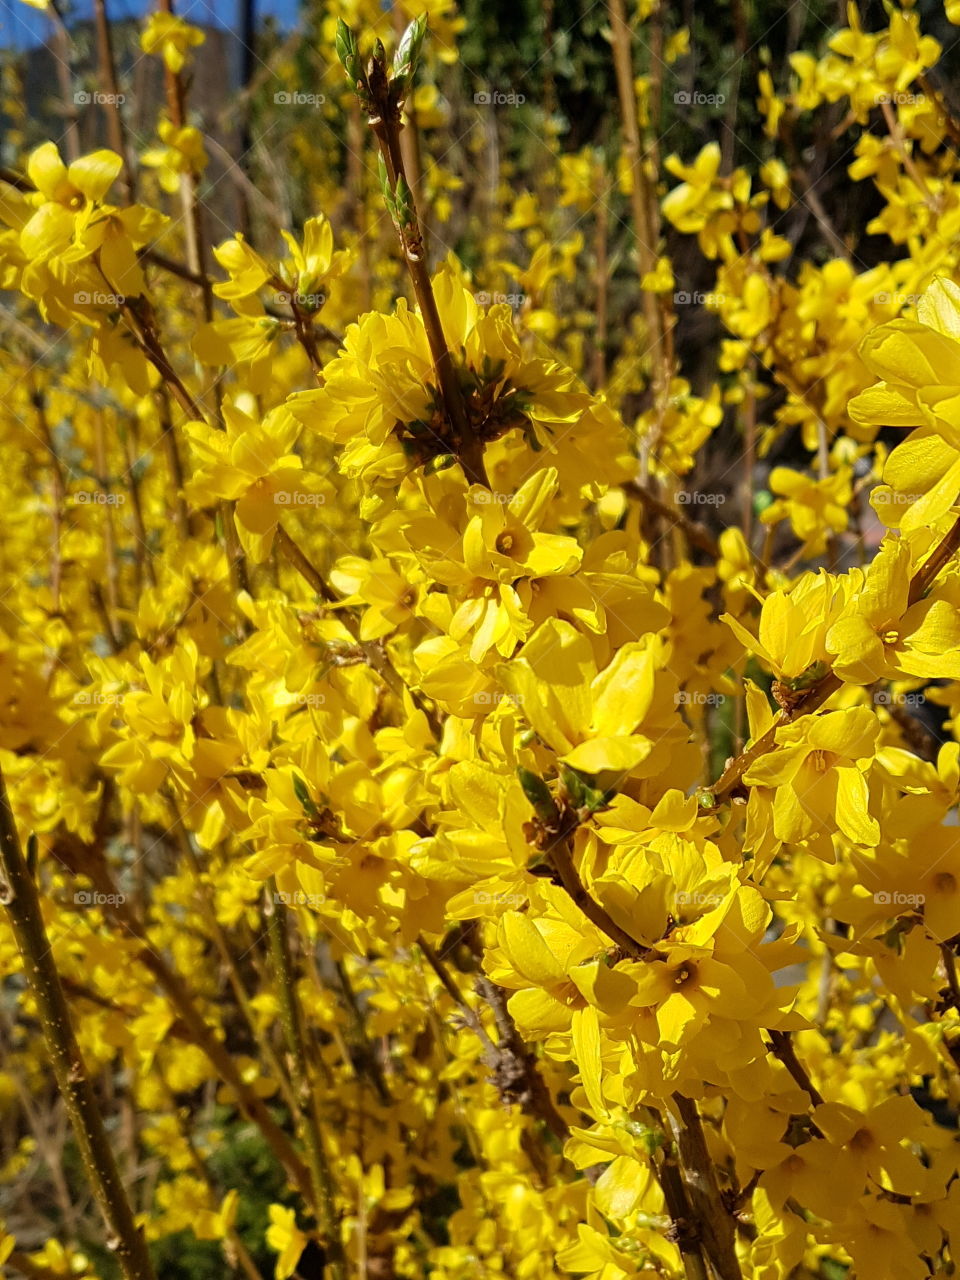 yellow spring flowers